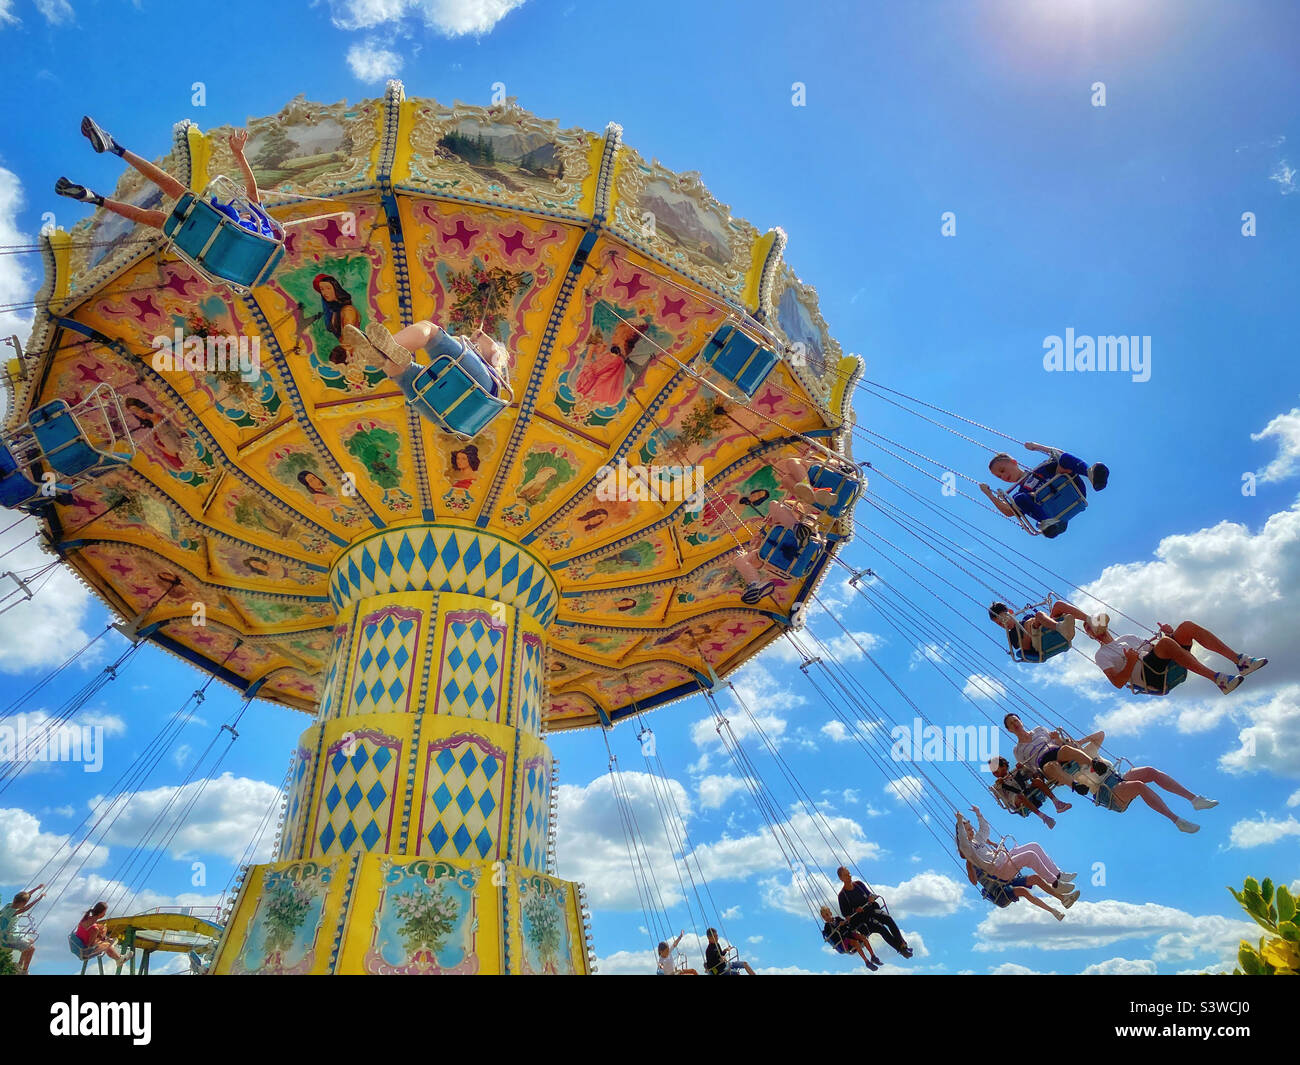 People enjoy riding on the sky swinger carousel ride at a summer fun fair. You can’t beat family summer fun at the Fayre! Photo ©️ COLIN HOSKINS. Stock Photo